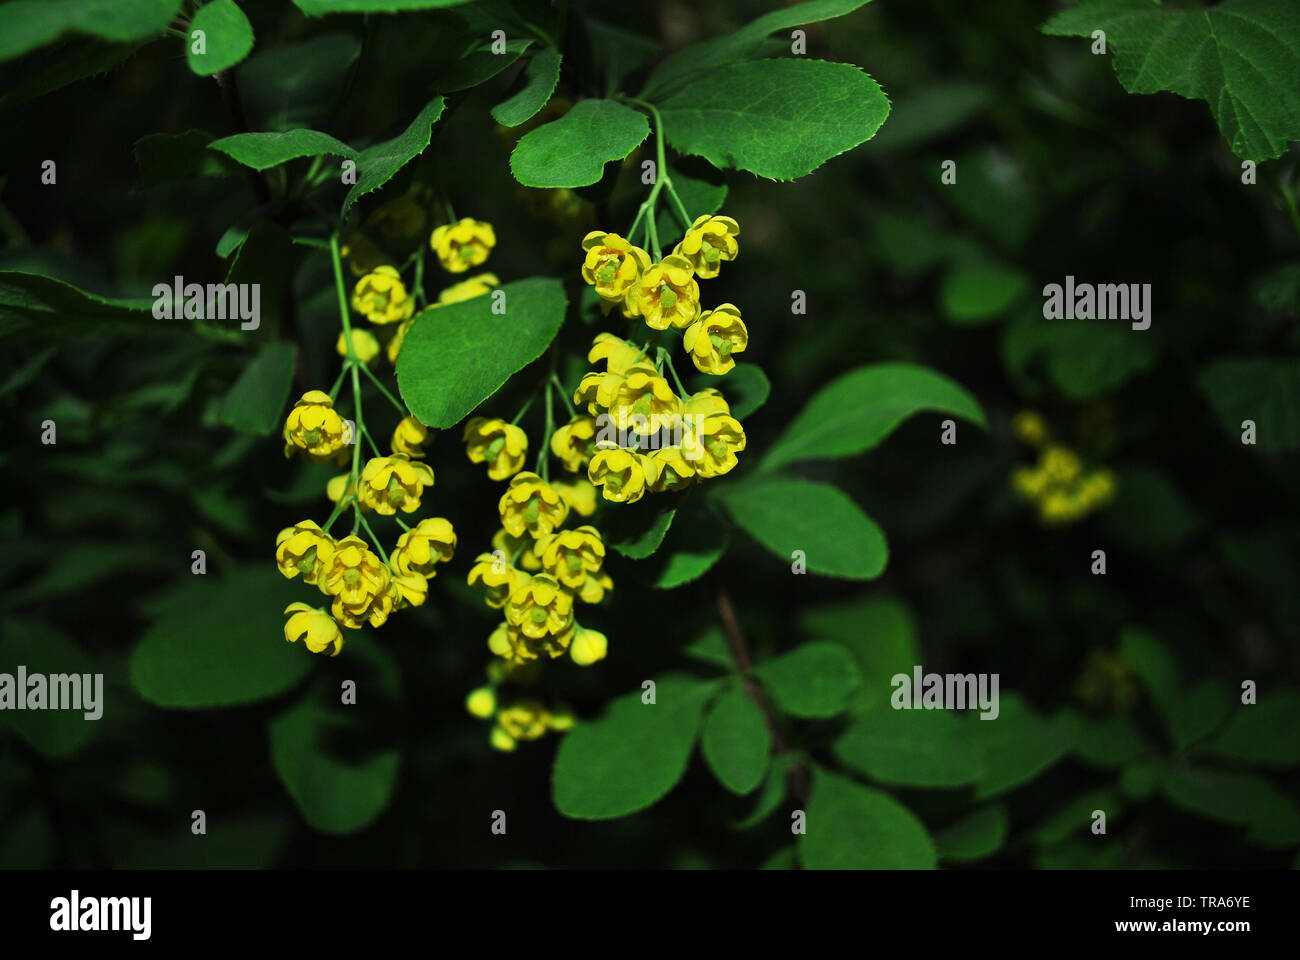 Yellow barberry flowers on twig with young green leaves, blurry dark background Stock Photo